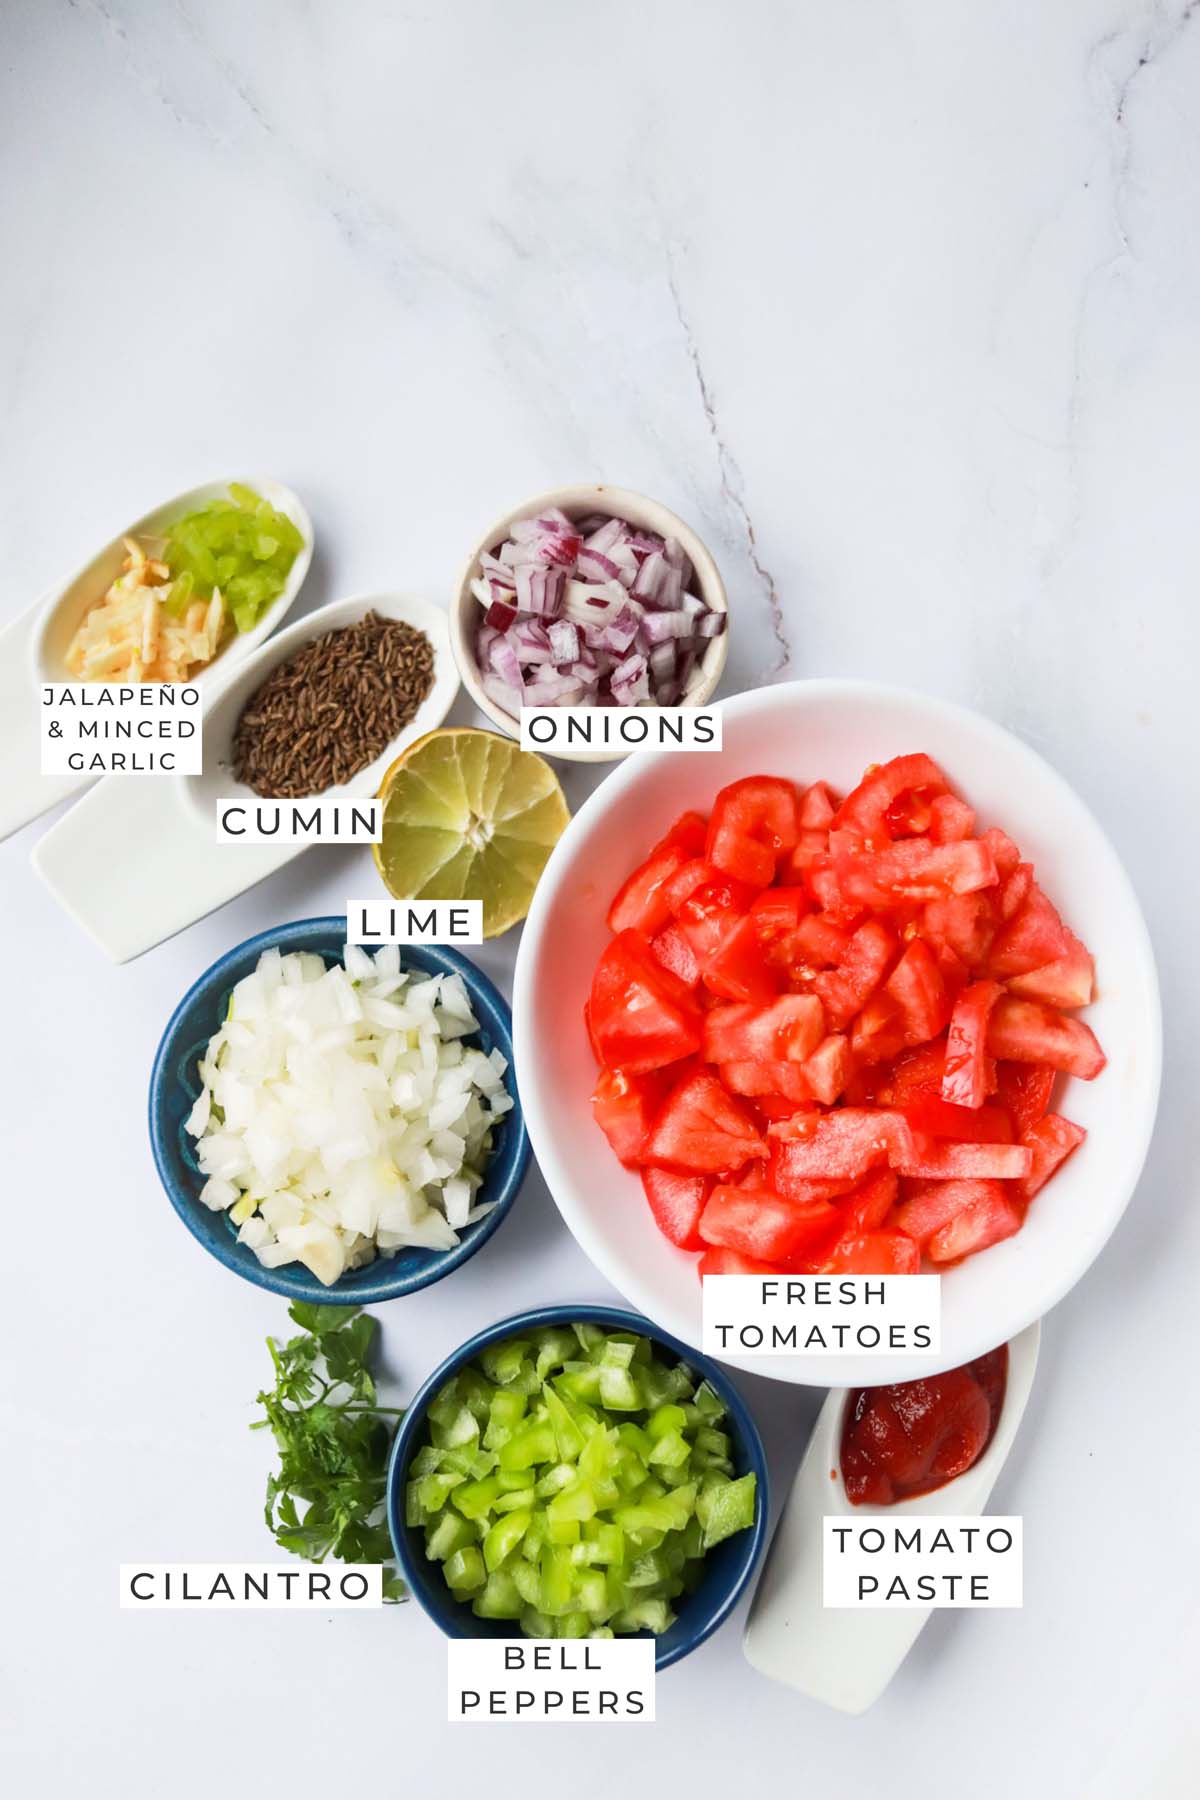 Labeled ingredients for the salsa.